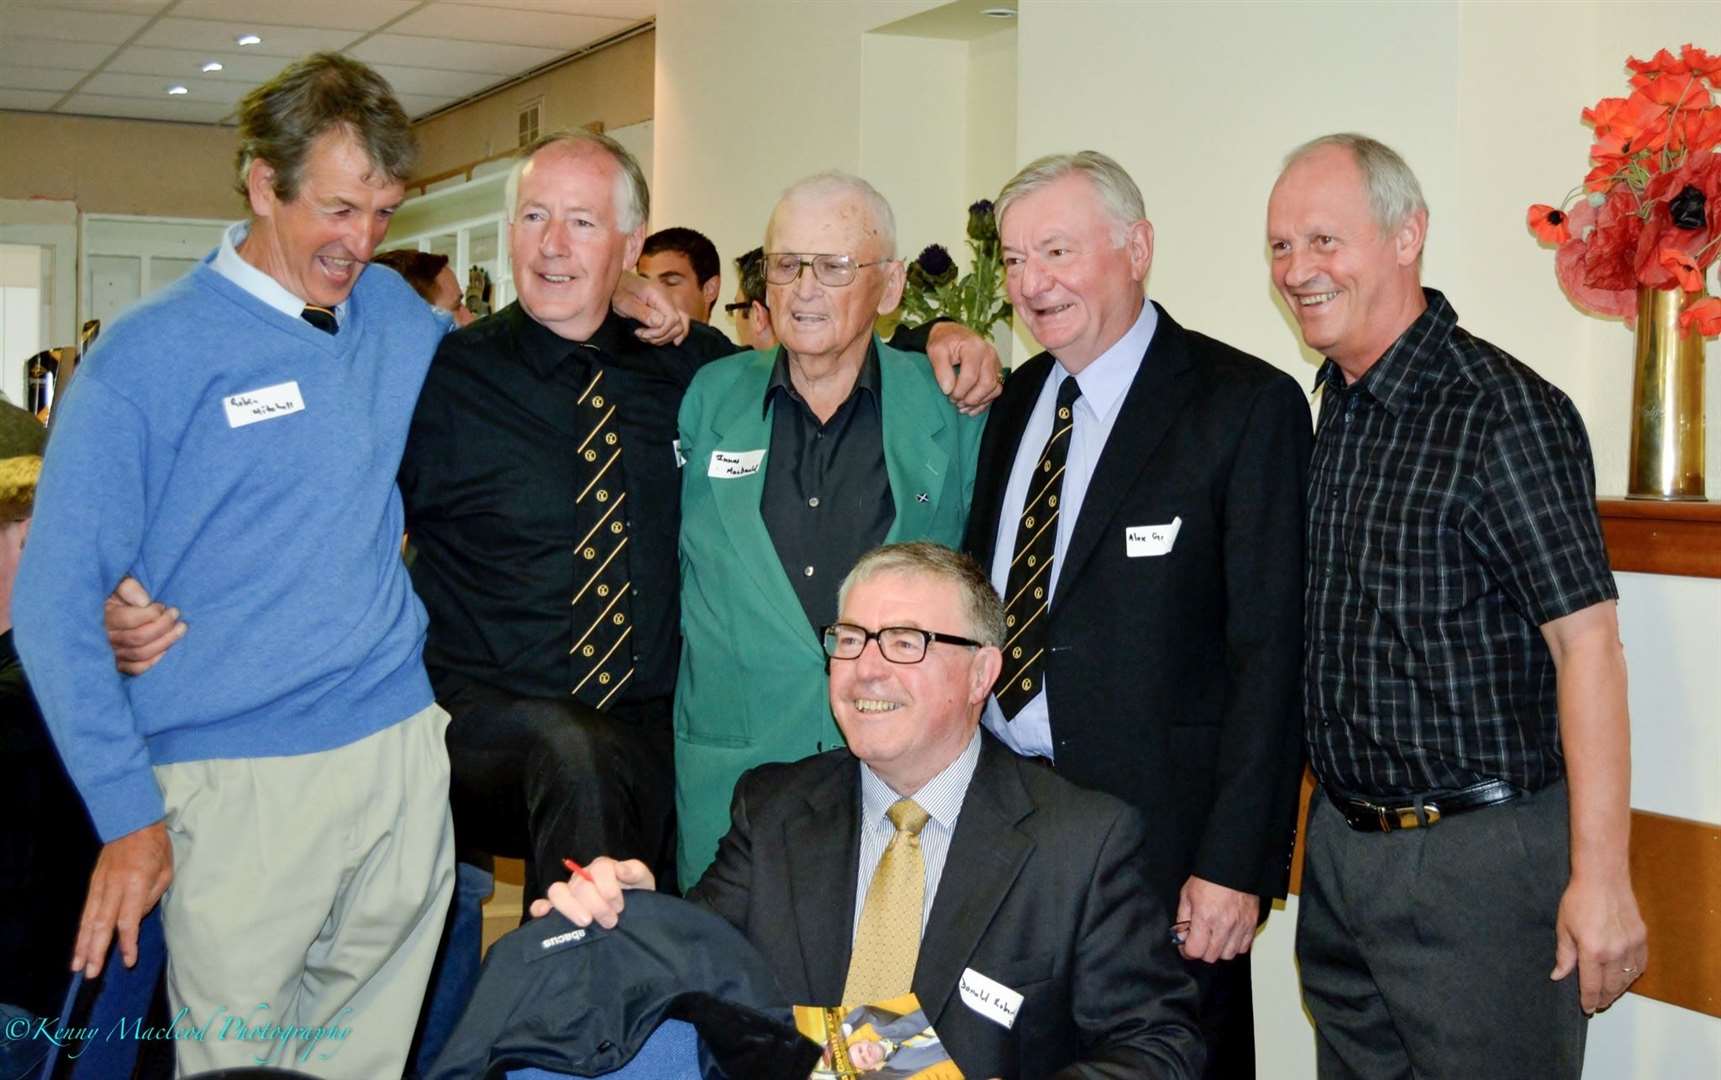 Stan Brown (right) with some of his fellow Nairn County legends of 1976, in 2014, Robin Mitchell, Norman Macdonald, the late Innes Macdonald, Alex Gordon and Donald Robertson.